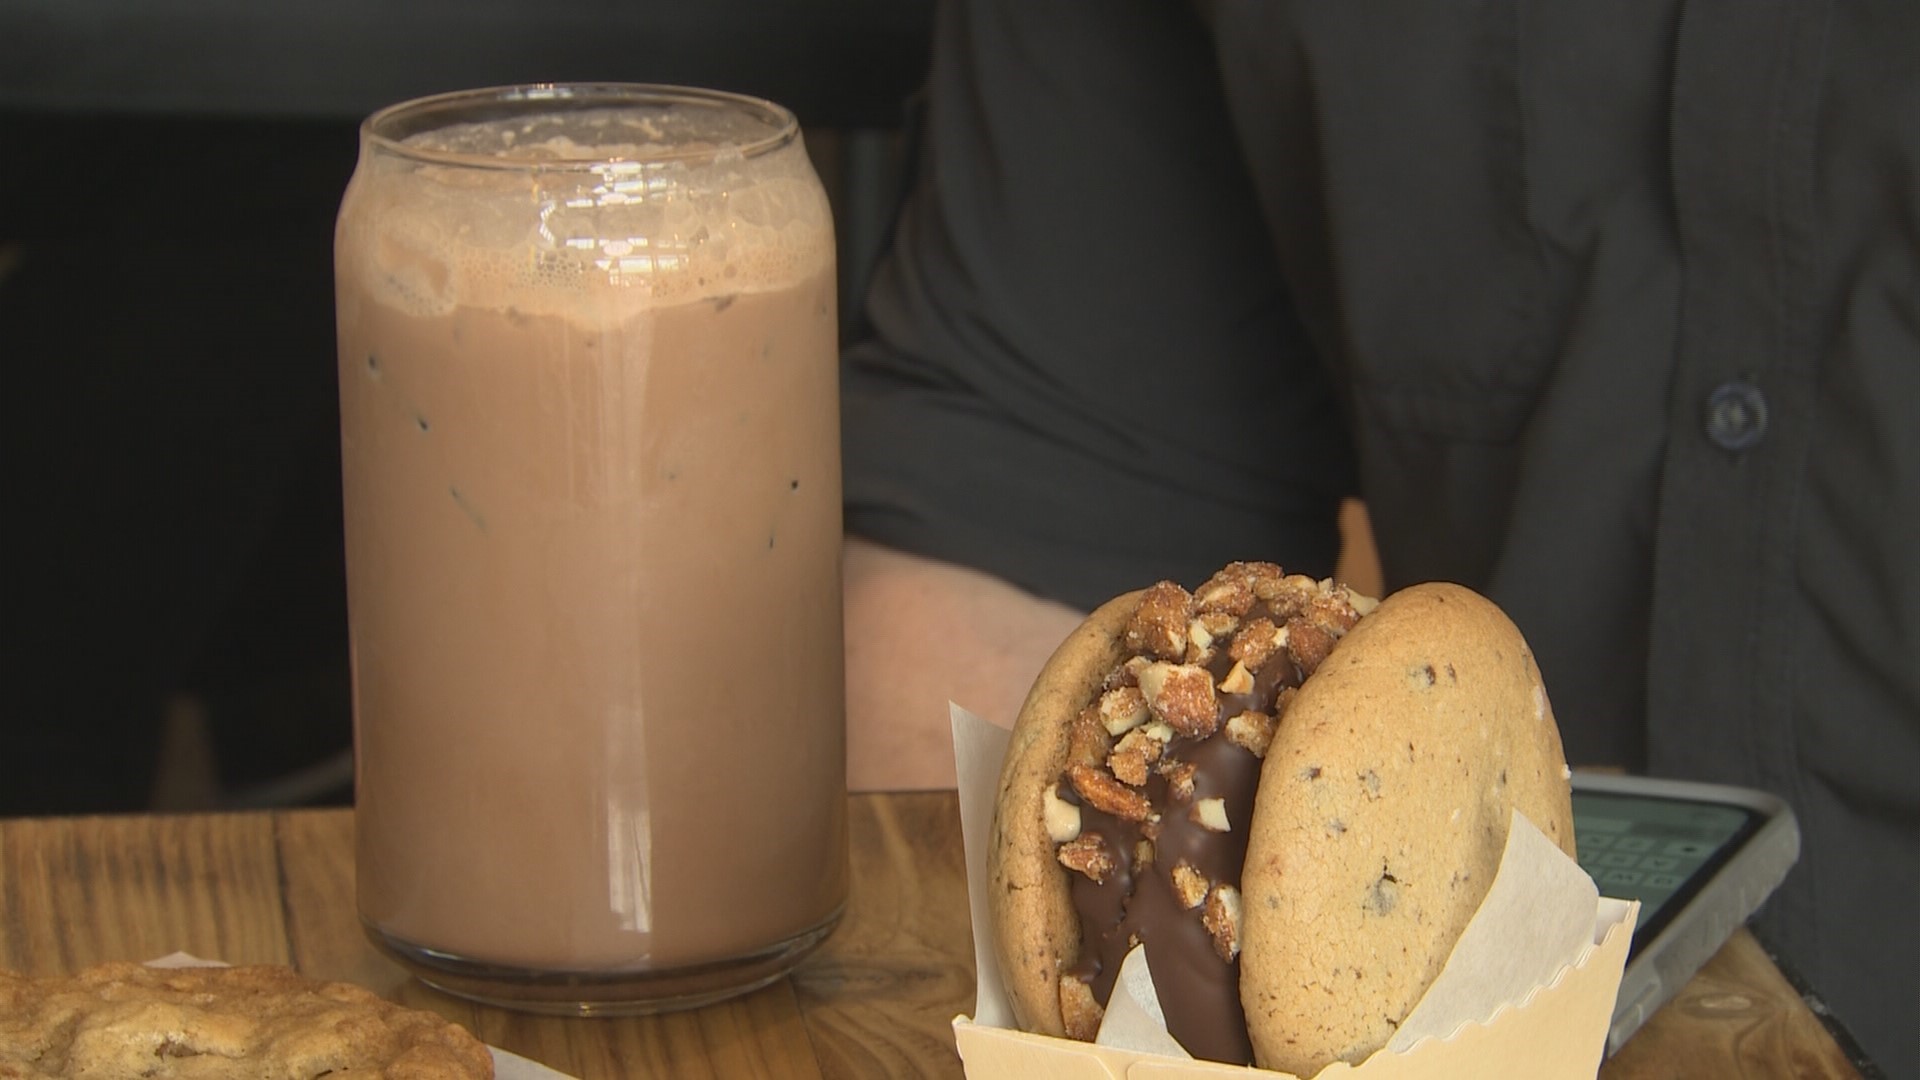 All the chocolate-based beverages at the Pike Place Market location include their housemade ganache.